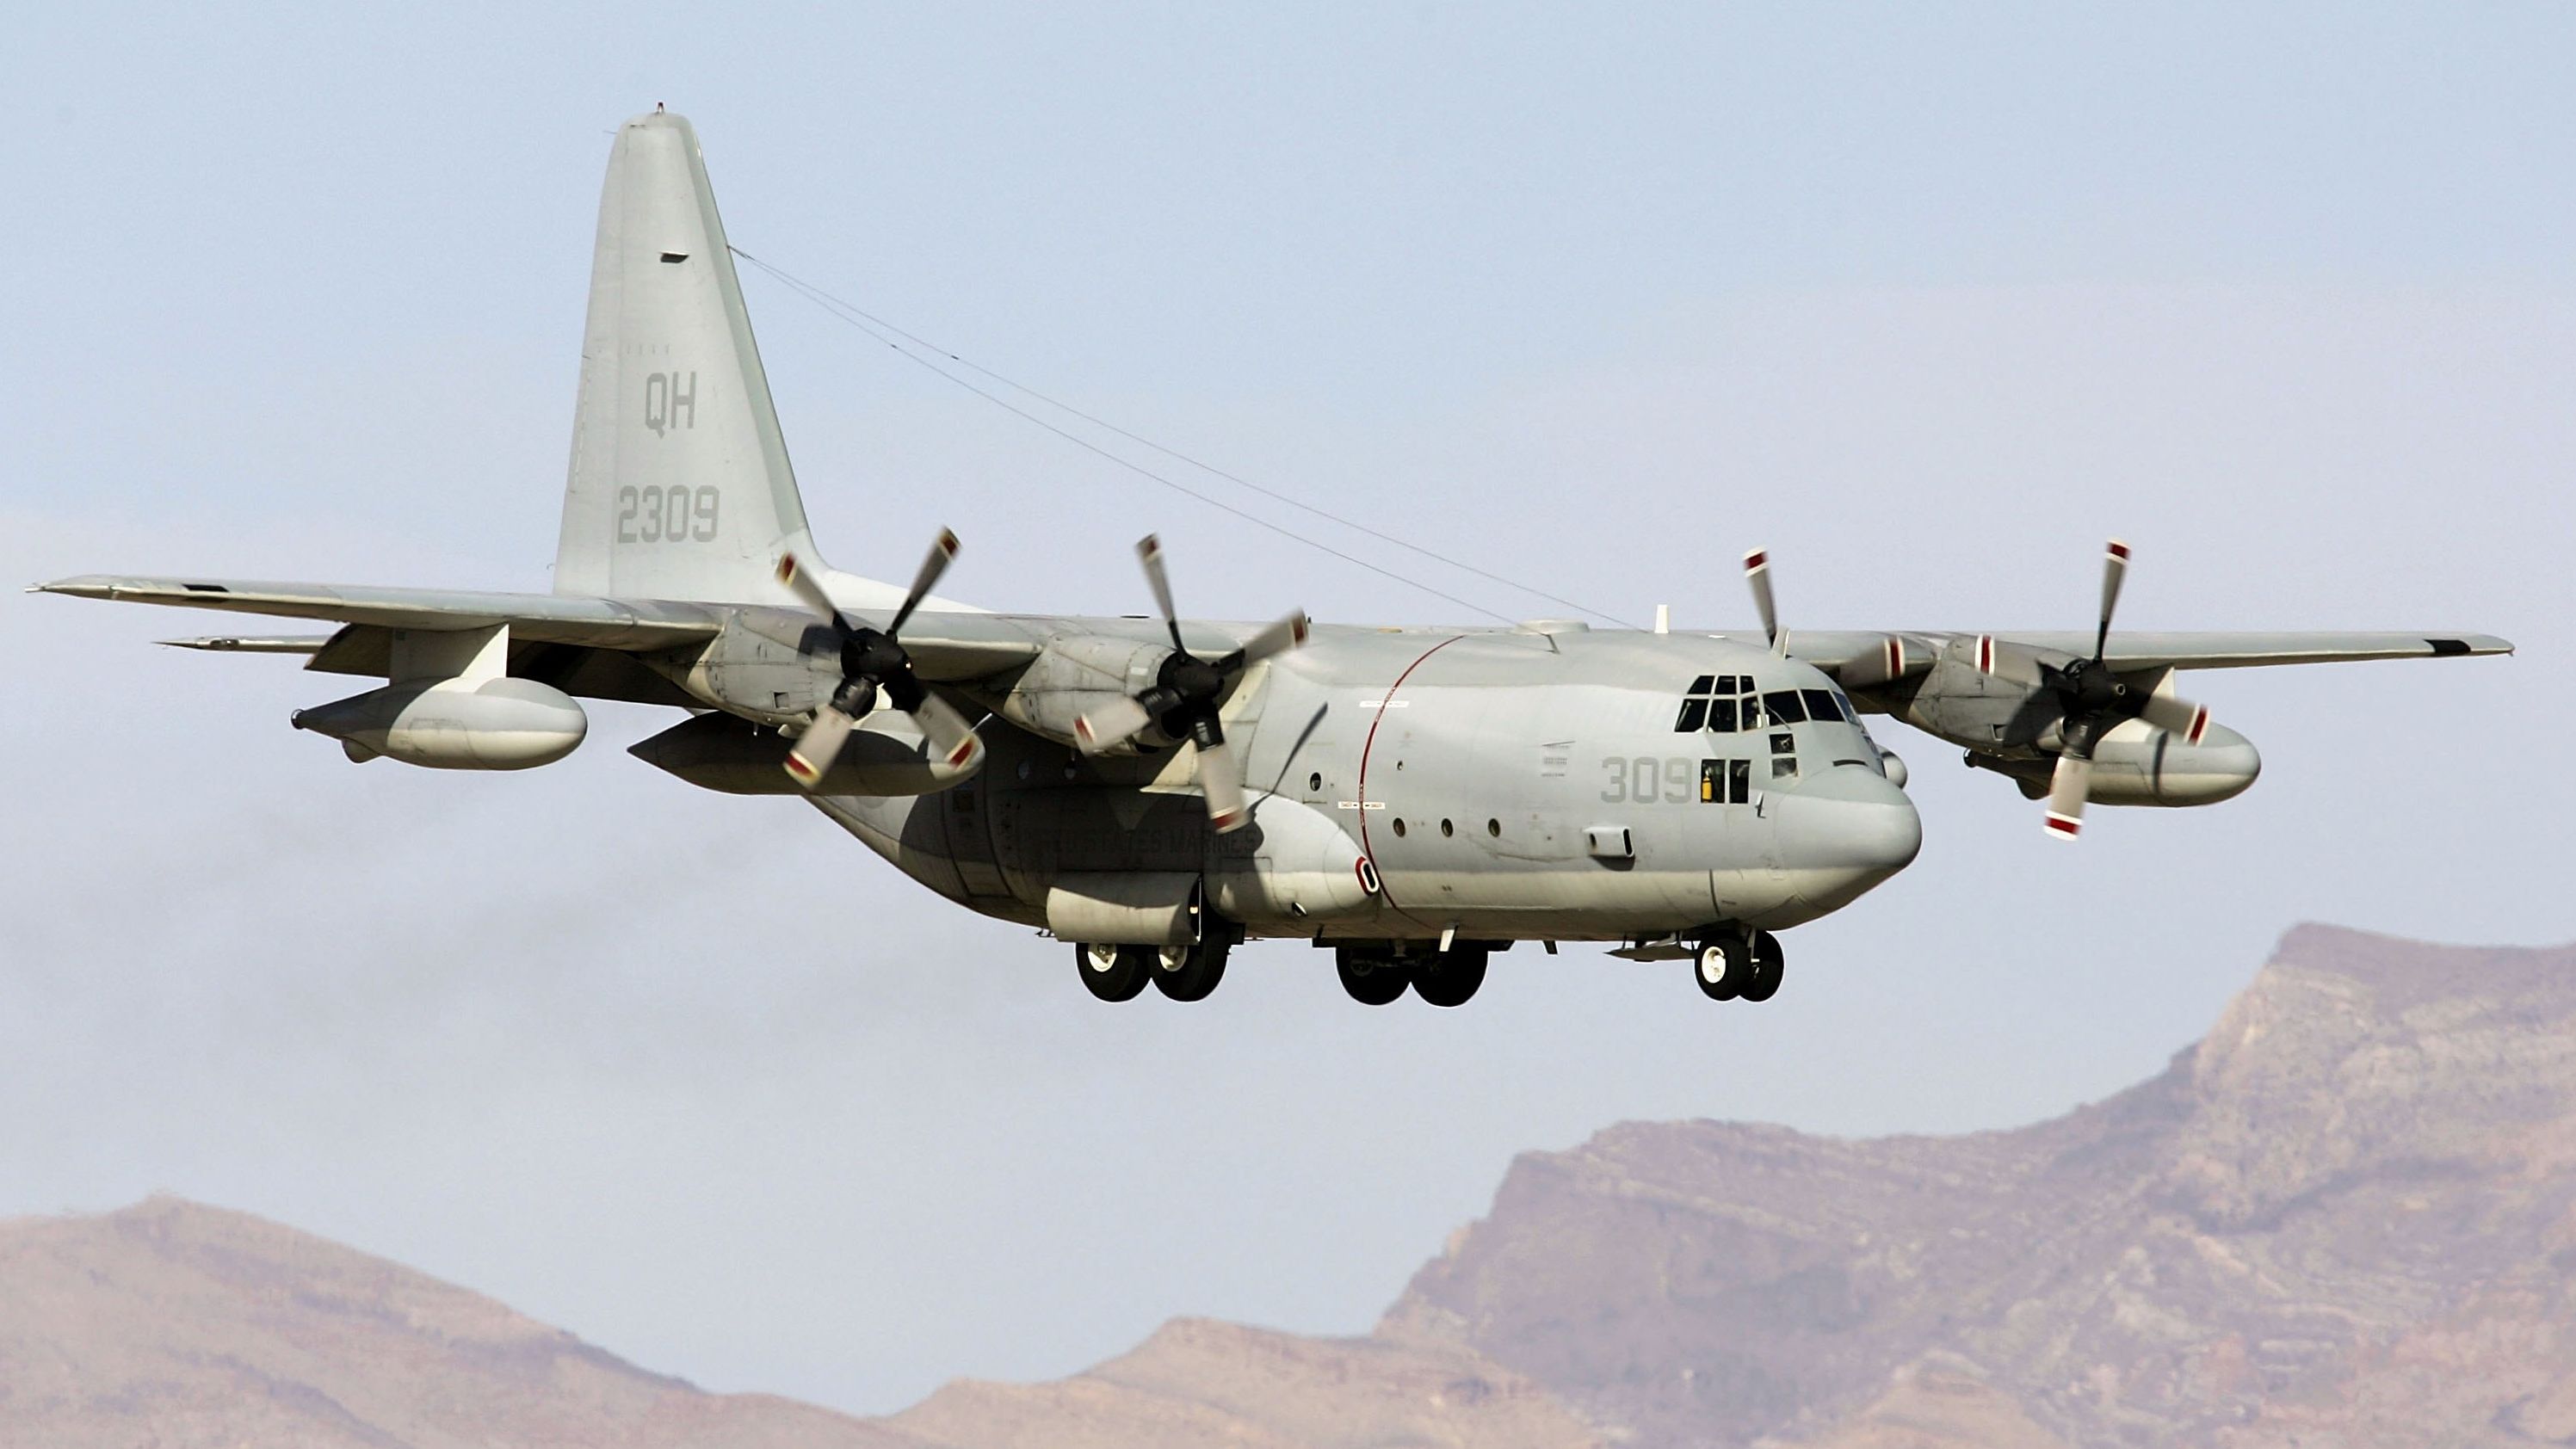 The KC-130 is able to refuel planes in the air and transport troops and equipment. 